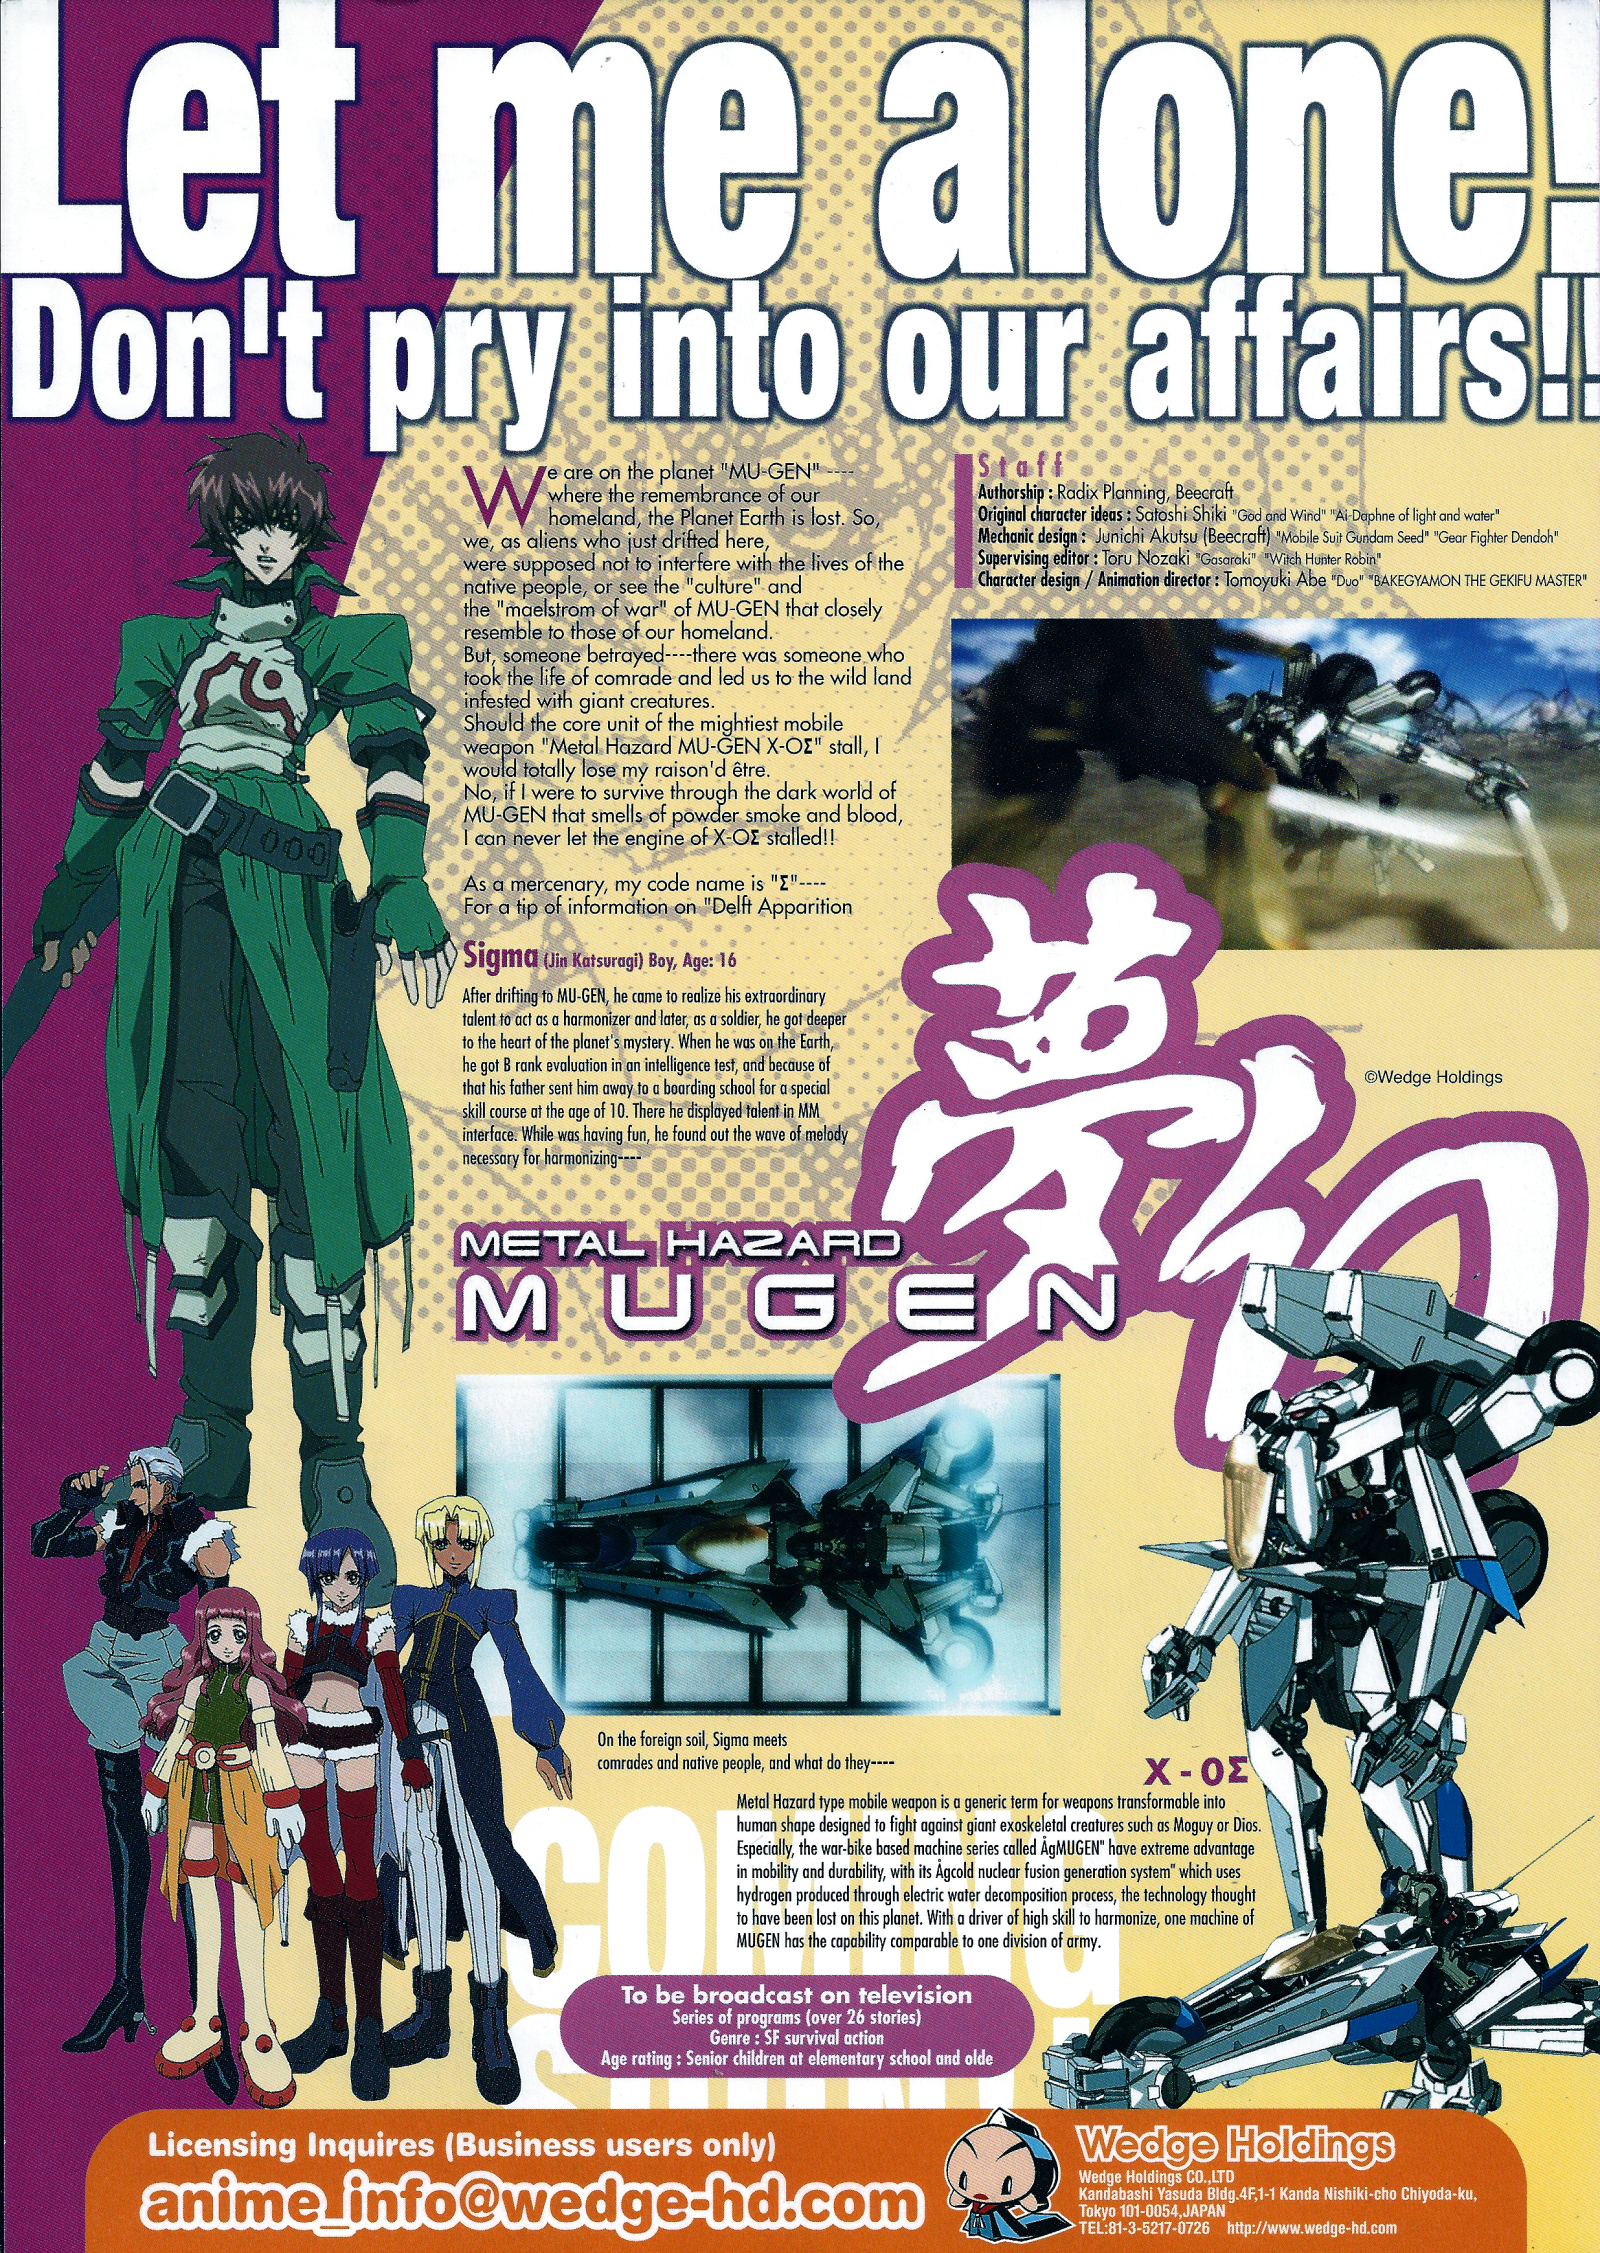 Can You Watch Demon Slayer: Mugen Train Without Watching the Series?